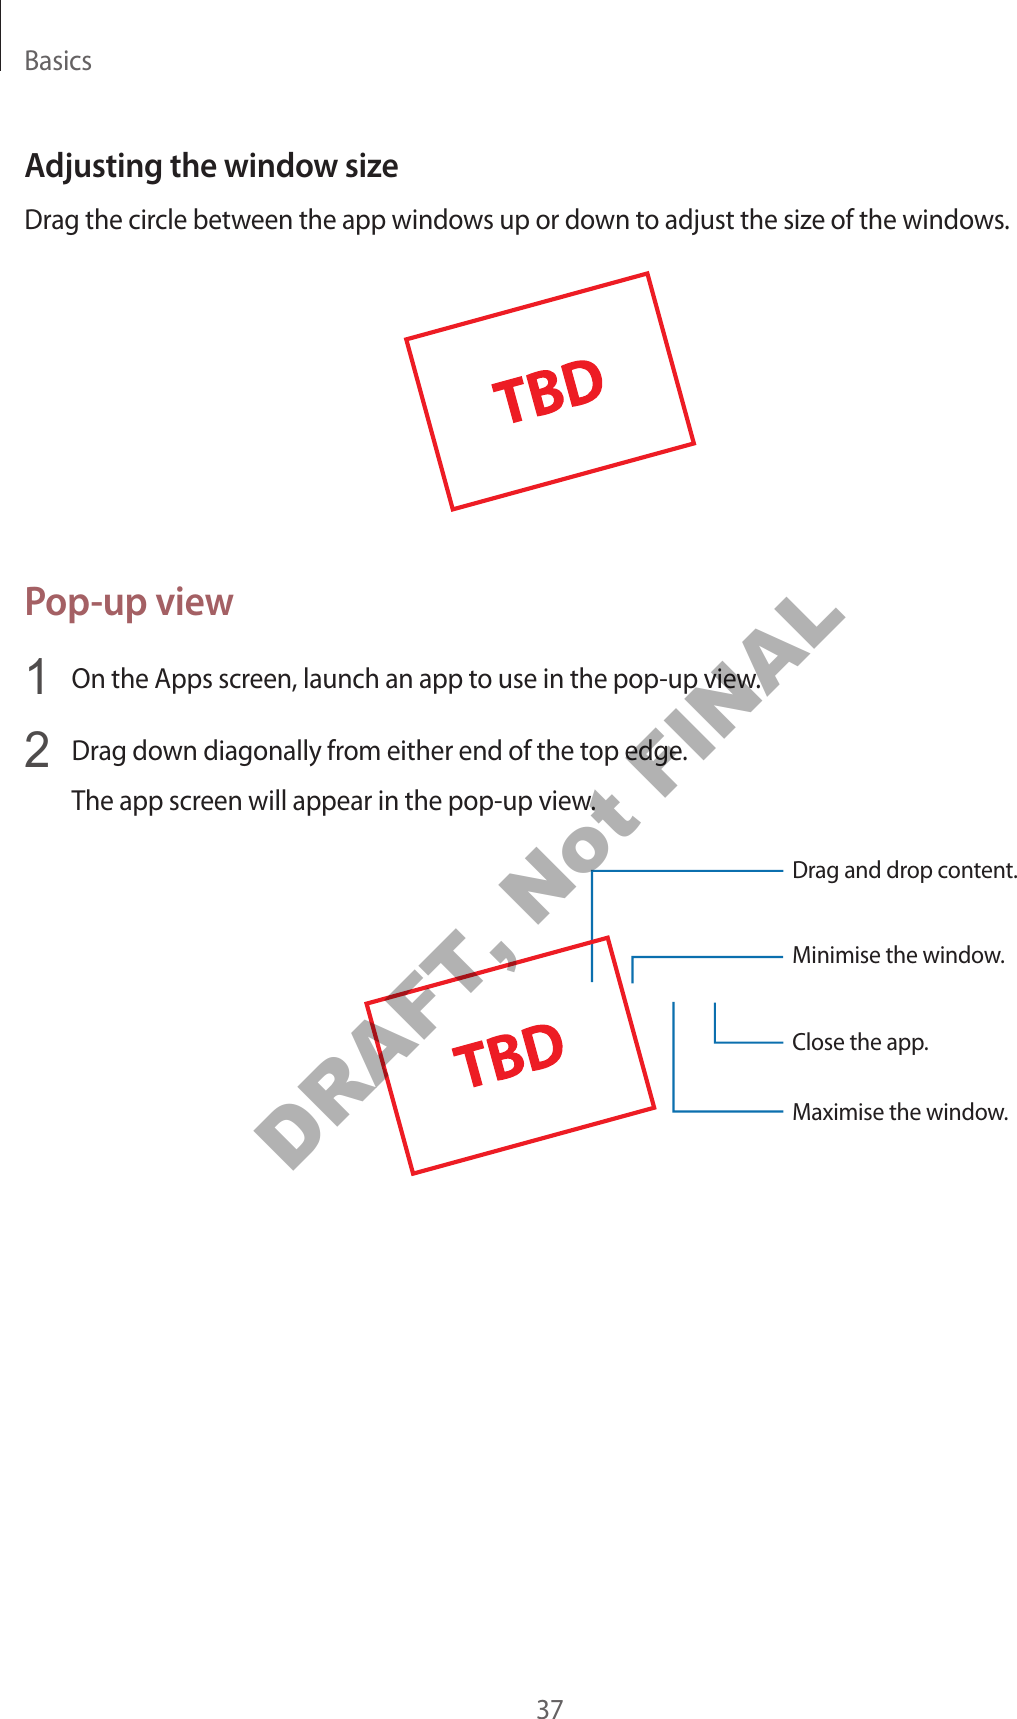 Basics37Adjusting the windo w siz eDrag the circle between the app windo w s up or down t o adjust the siz e of the window s .Pop-up view1  On the Apps screen, launch an app t o use in the pop-up view.2  Drag down diagonally fr om either end of the t op edge .The app screen will appear in the pop-up view.Minimise the window.Close the app .Maximise the window.Drag and drop c ont ent.DRAFT, Not FINAL